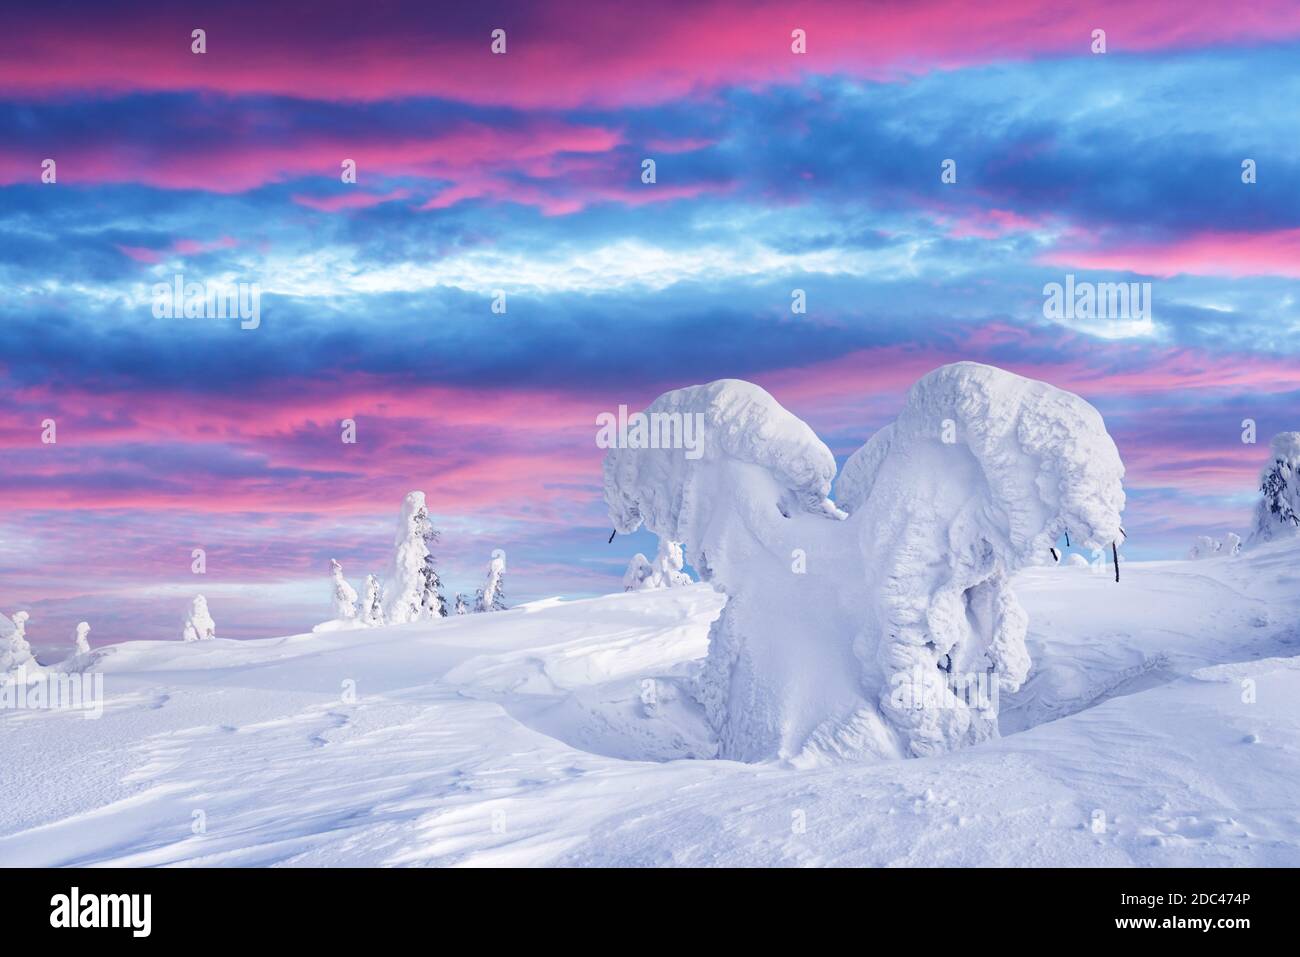 Fantastic winter landscape with snowy trees and sunrise pink sky. Lapland, Finland, Europe. Christmas holiday concept Stock Photo